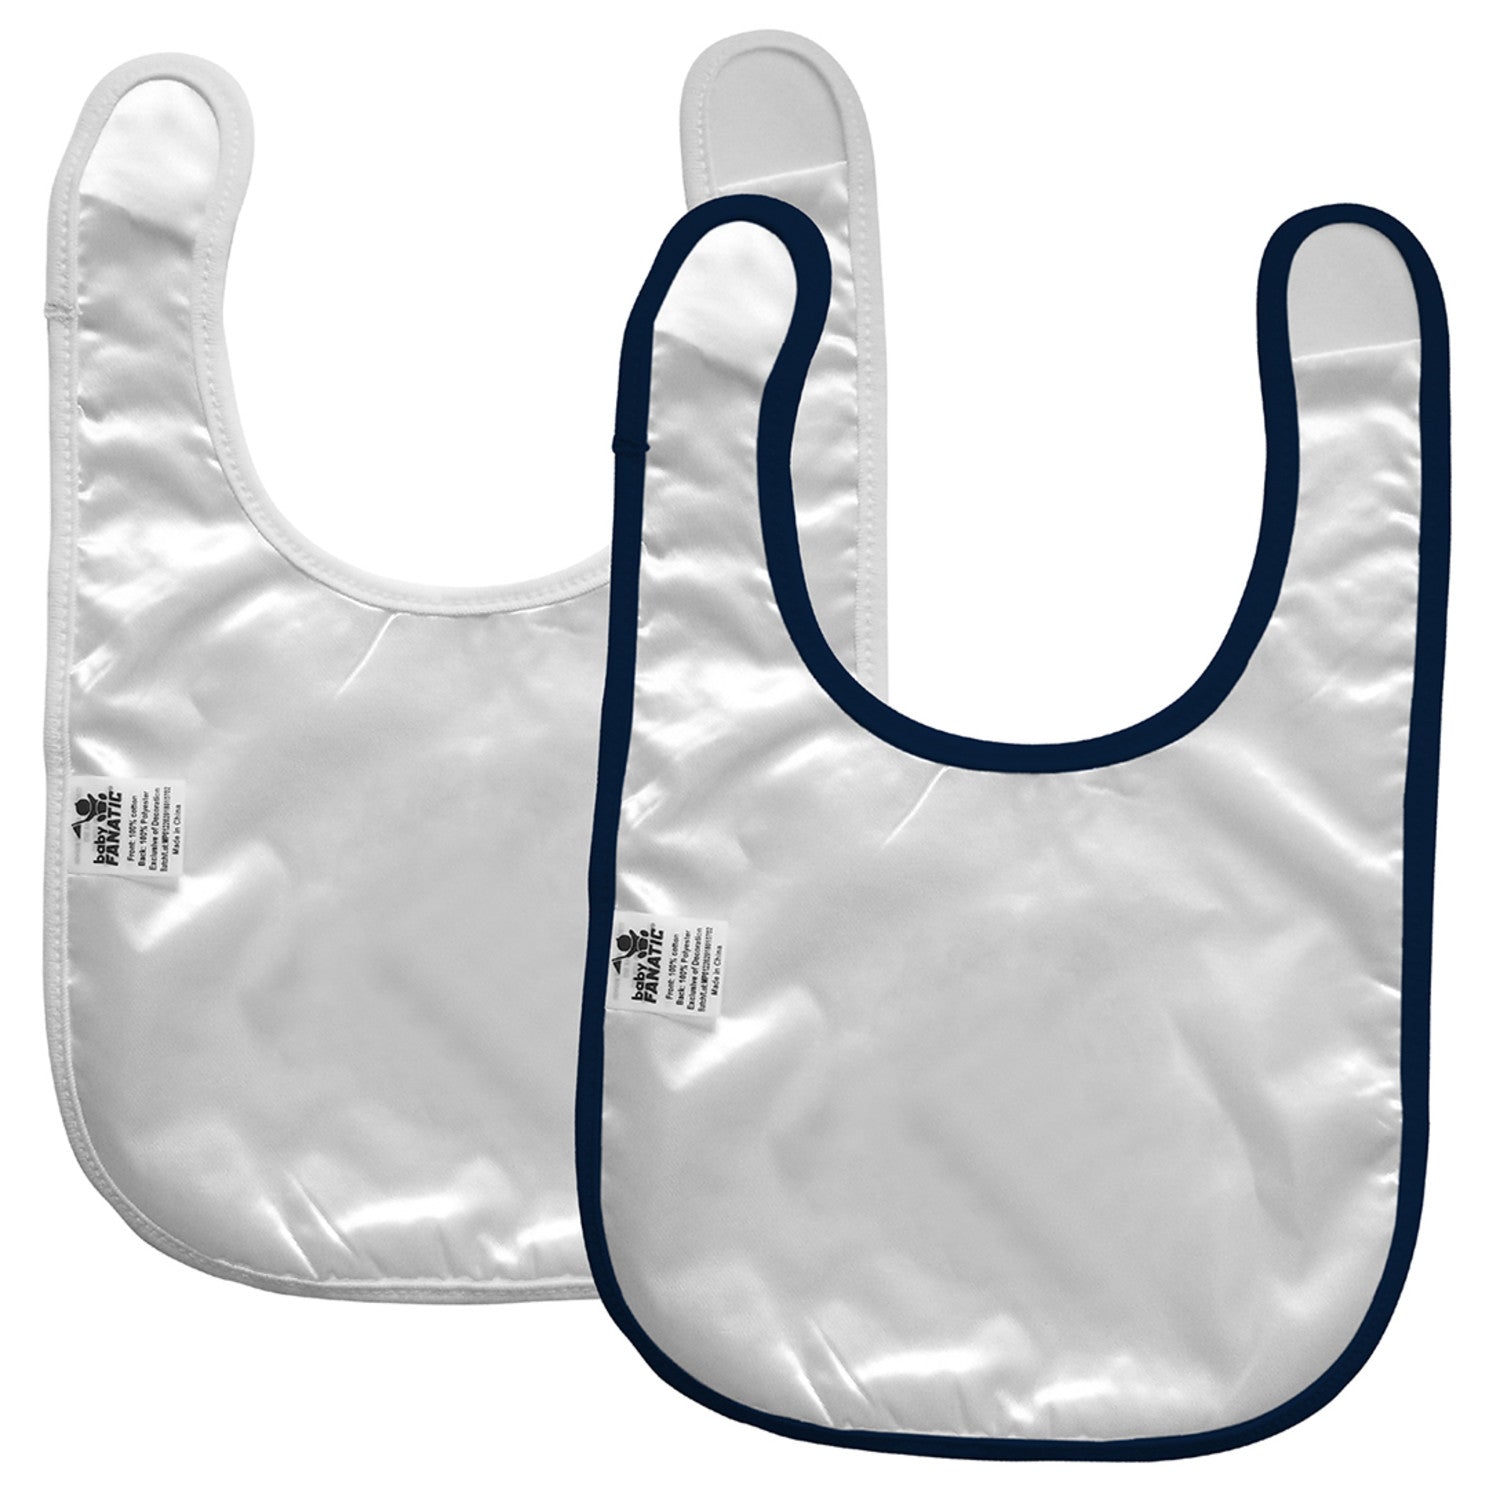 Penn State Nittany Lions NCAA Baby Bibs 2-Pack